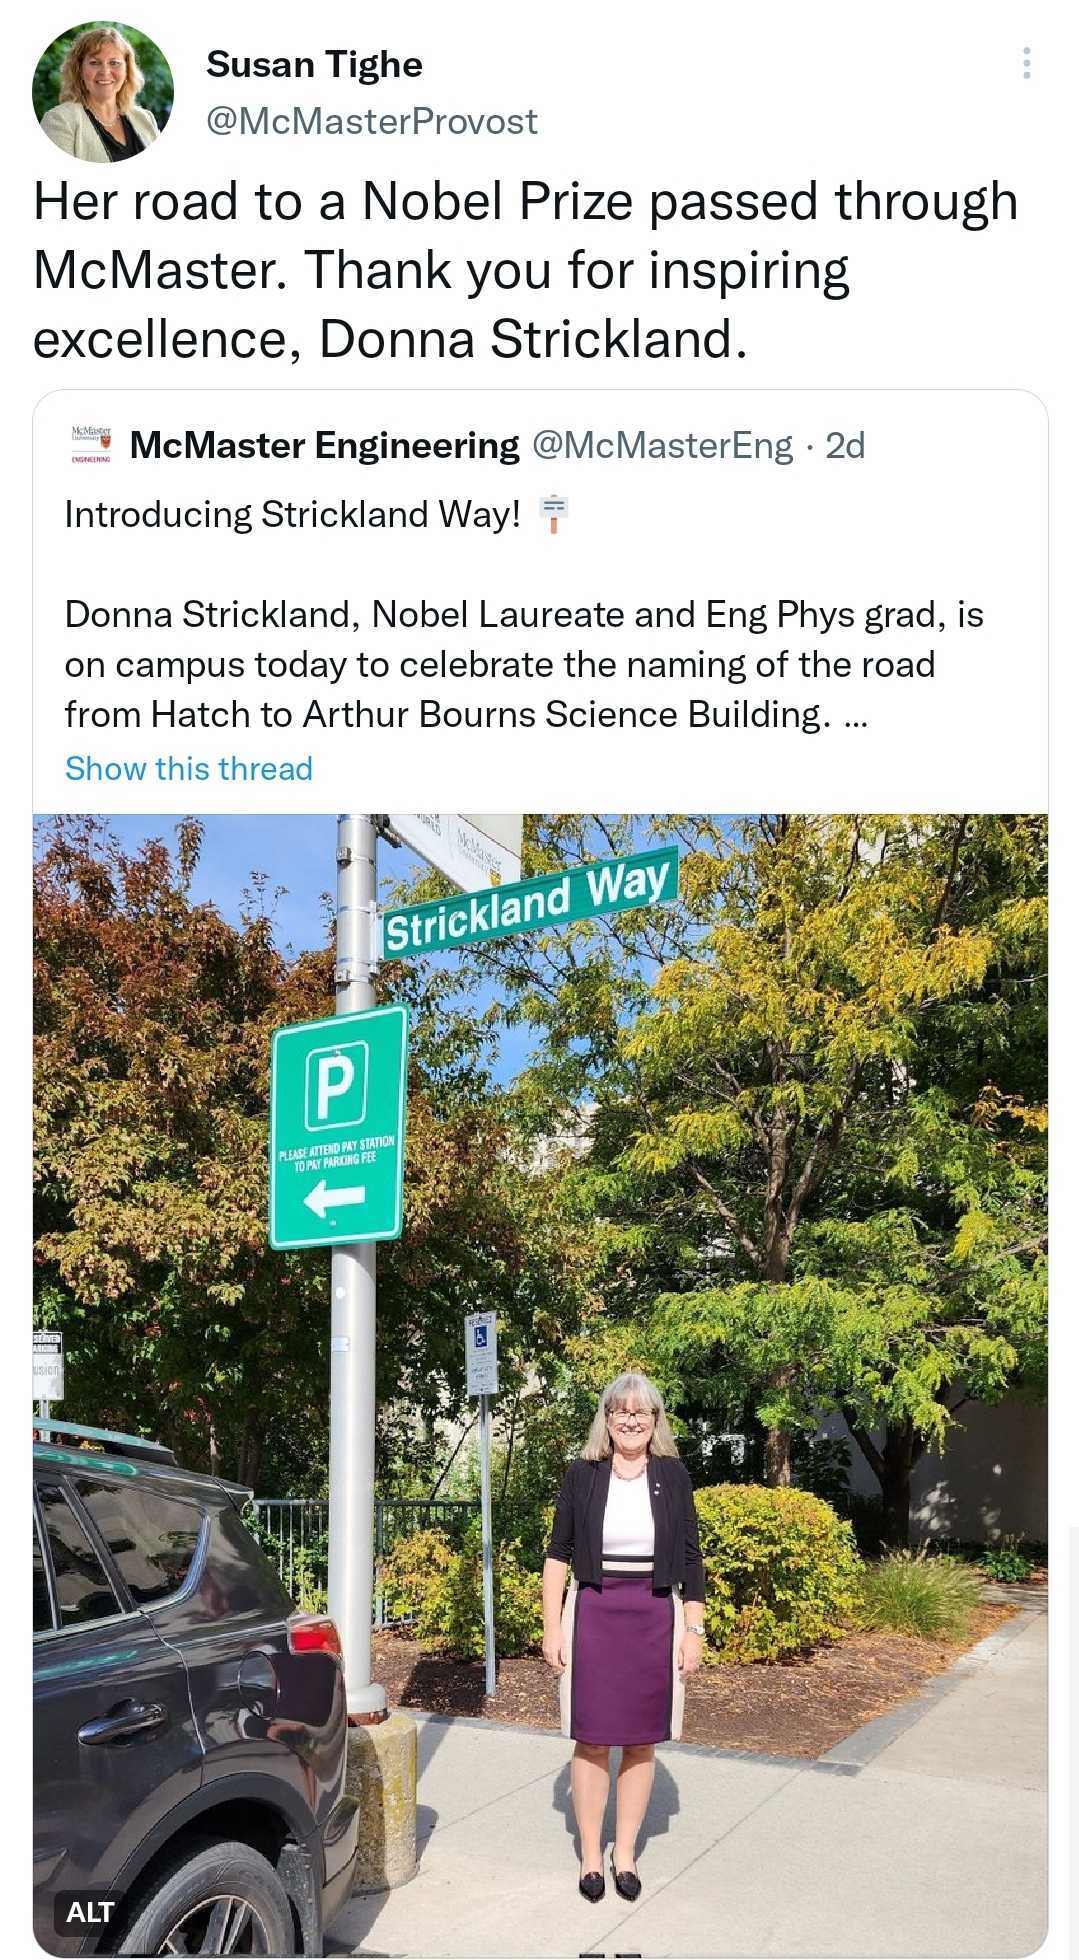 Tweet by Susan Tighe, provost, about Donna Strickland